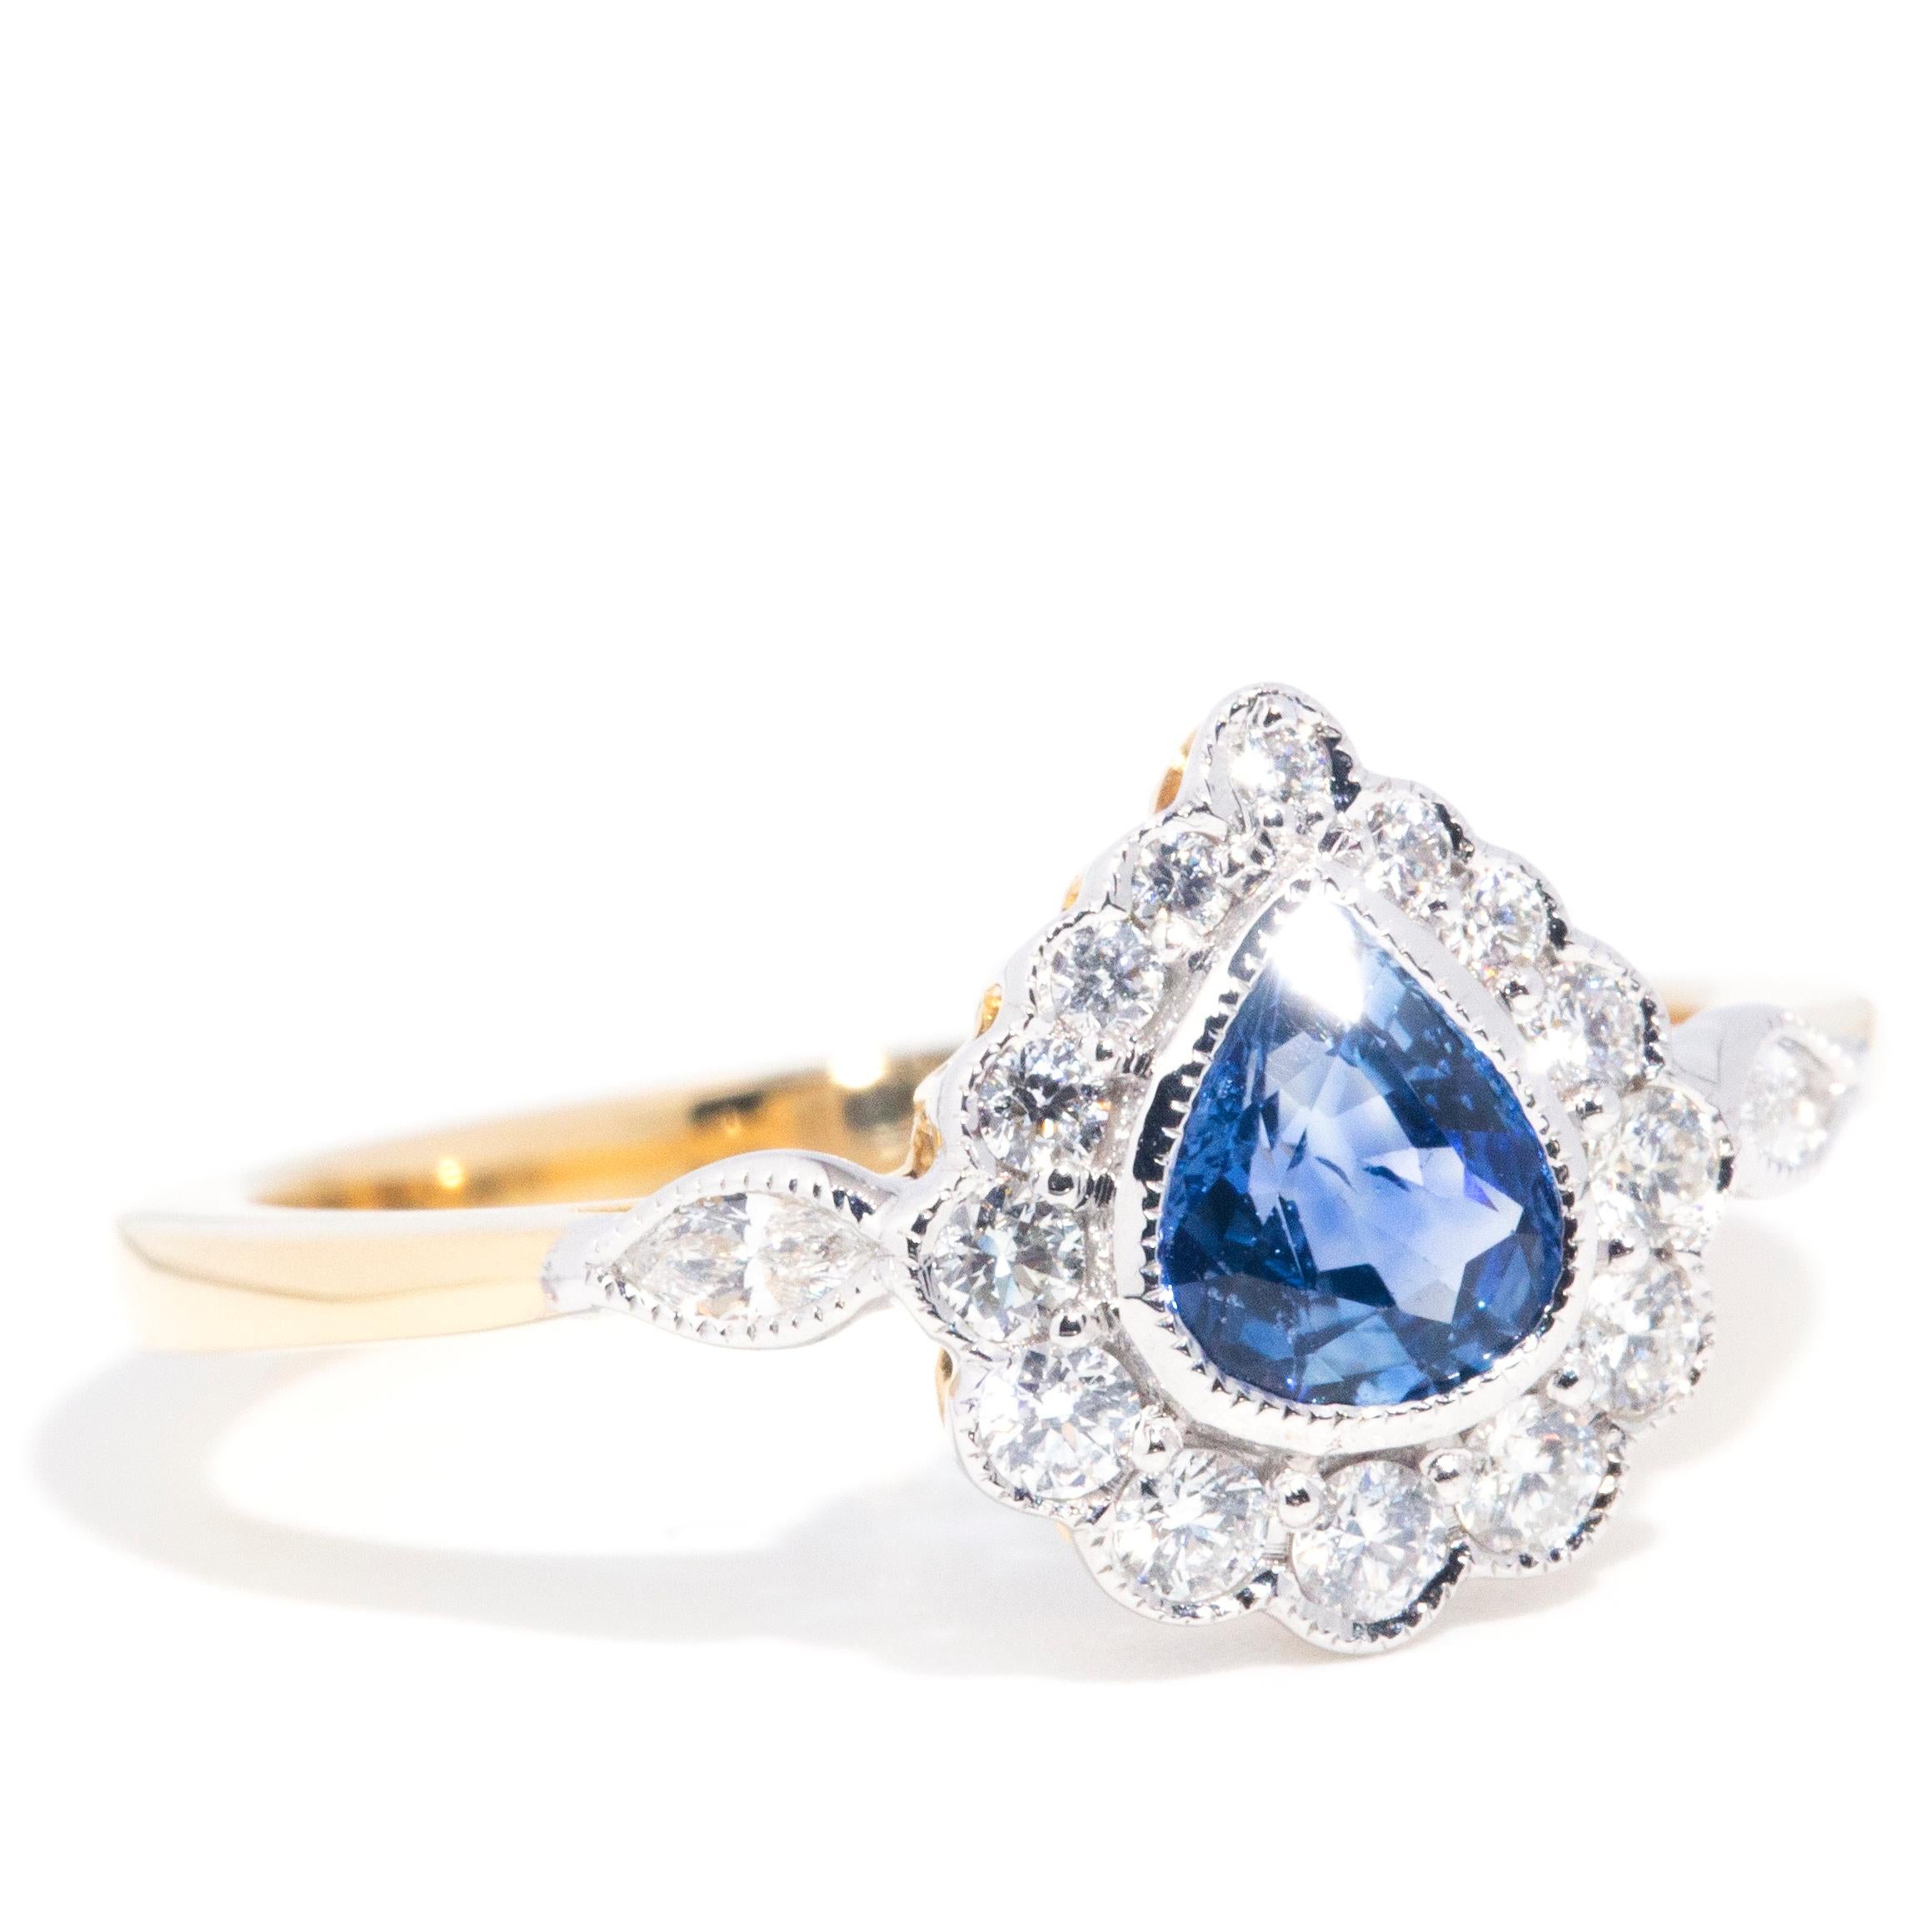 Lovingly crafted in 18 carat gold, this delightful halo ring features a gorgeous  bright blue pear cut blue sapphire resting in the centre and encompassed by a scintillating border of round brilliant diamonds. The graceful yellow gold band is